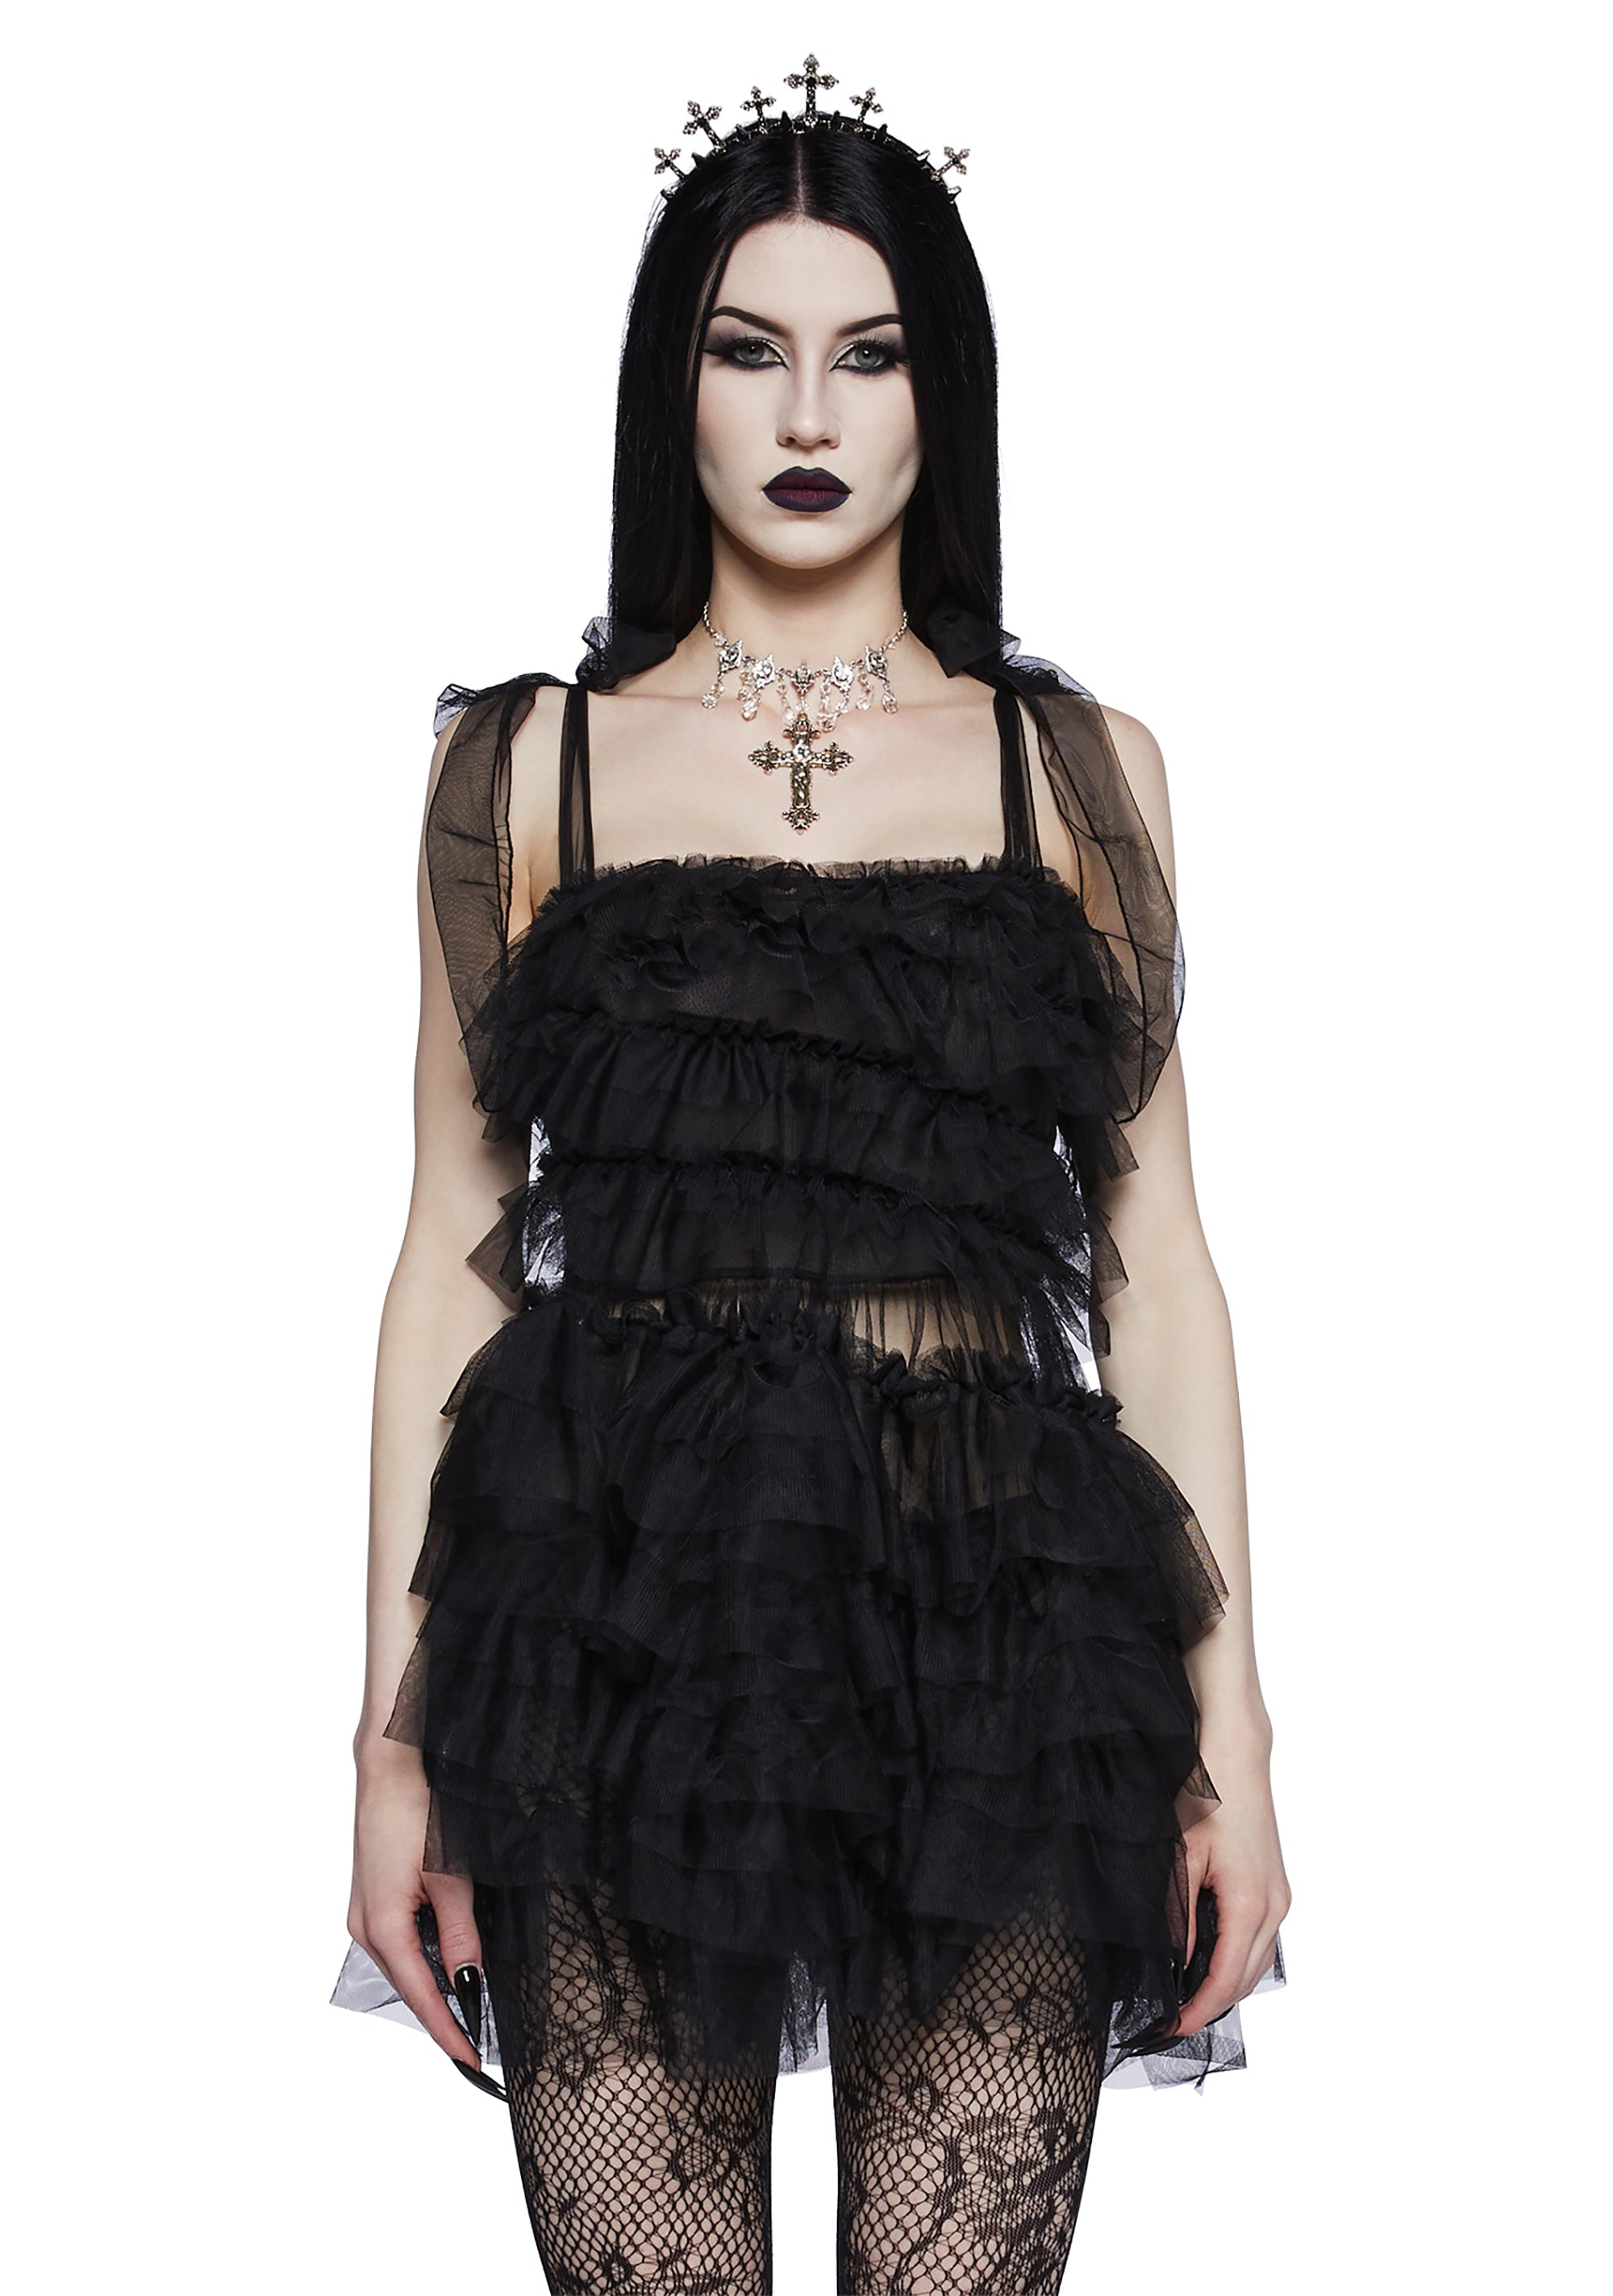 Gothic Sexy Lingerie: Add Some Mystery to Your Wardrobe – Dolls Kill